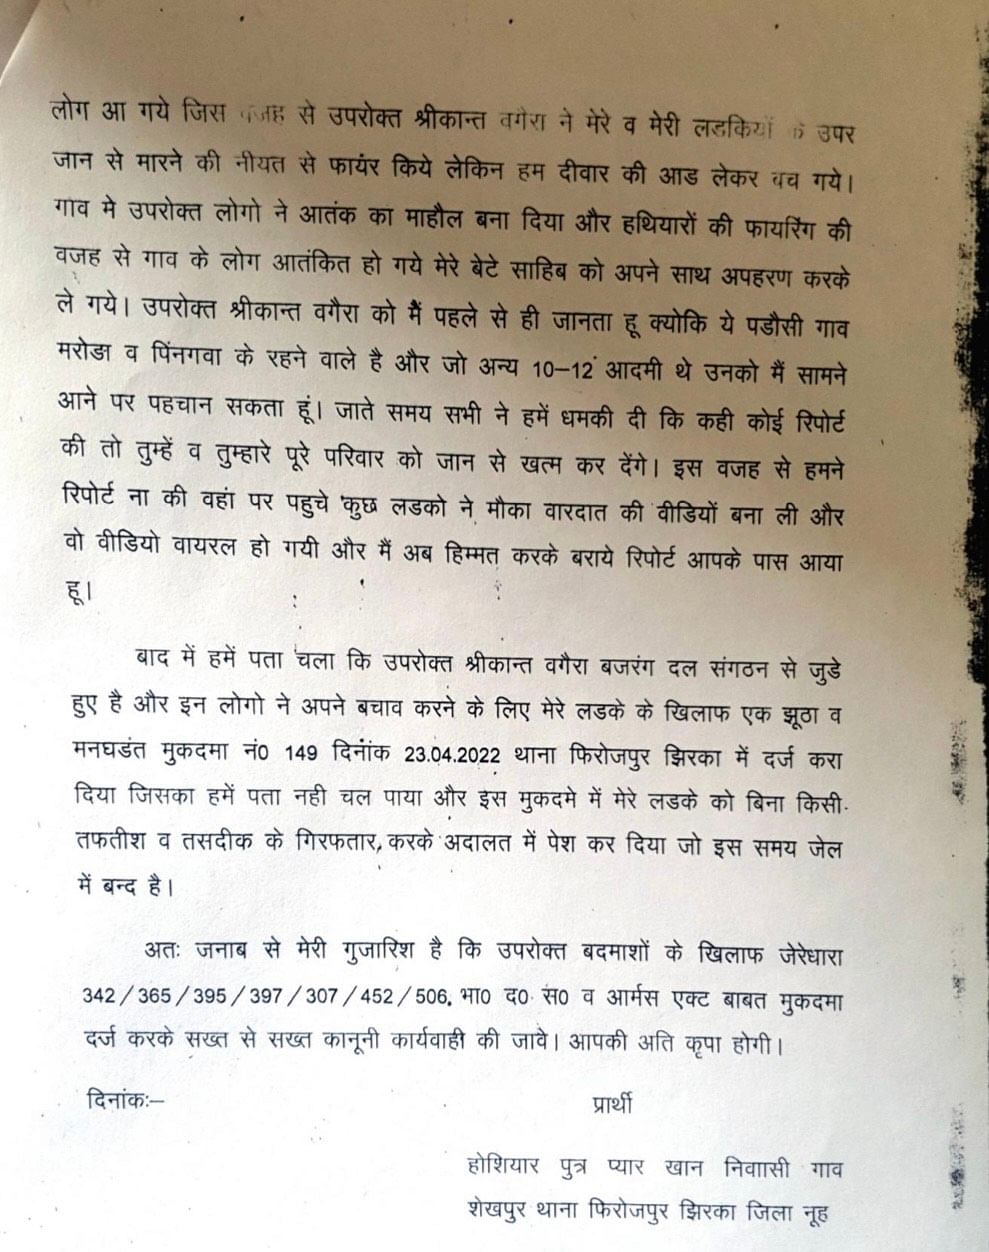 <div class="paragraphs"><p>The second page of the complaint letter written by Hoshiar Hussain to the Superintendent of Police.</p></div>